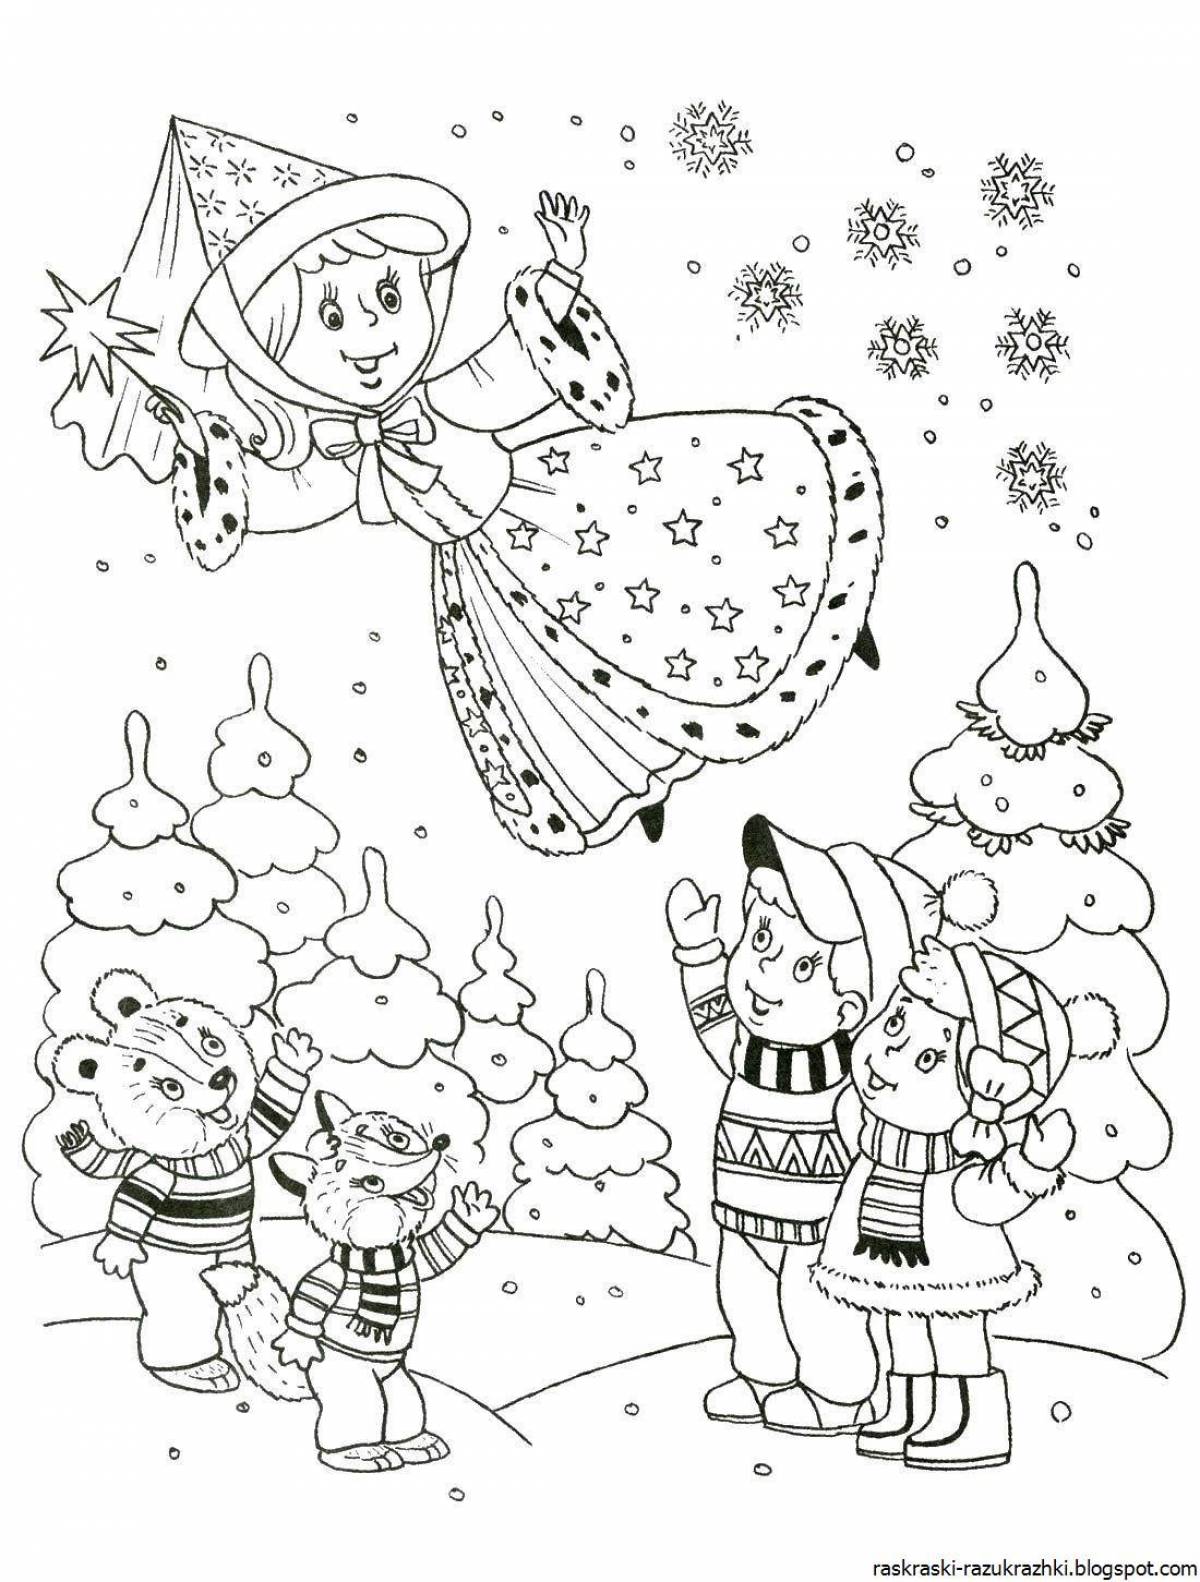 Great winter coloring book for kids 6-7 years old